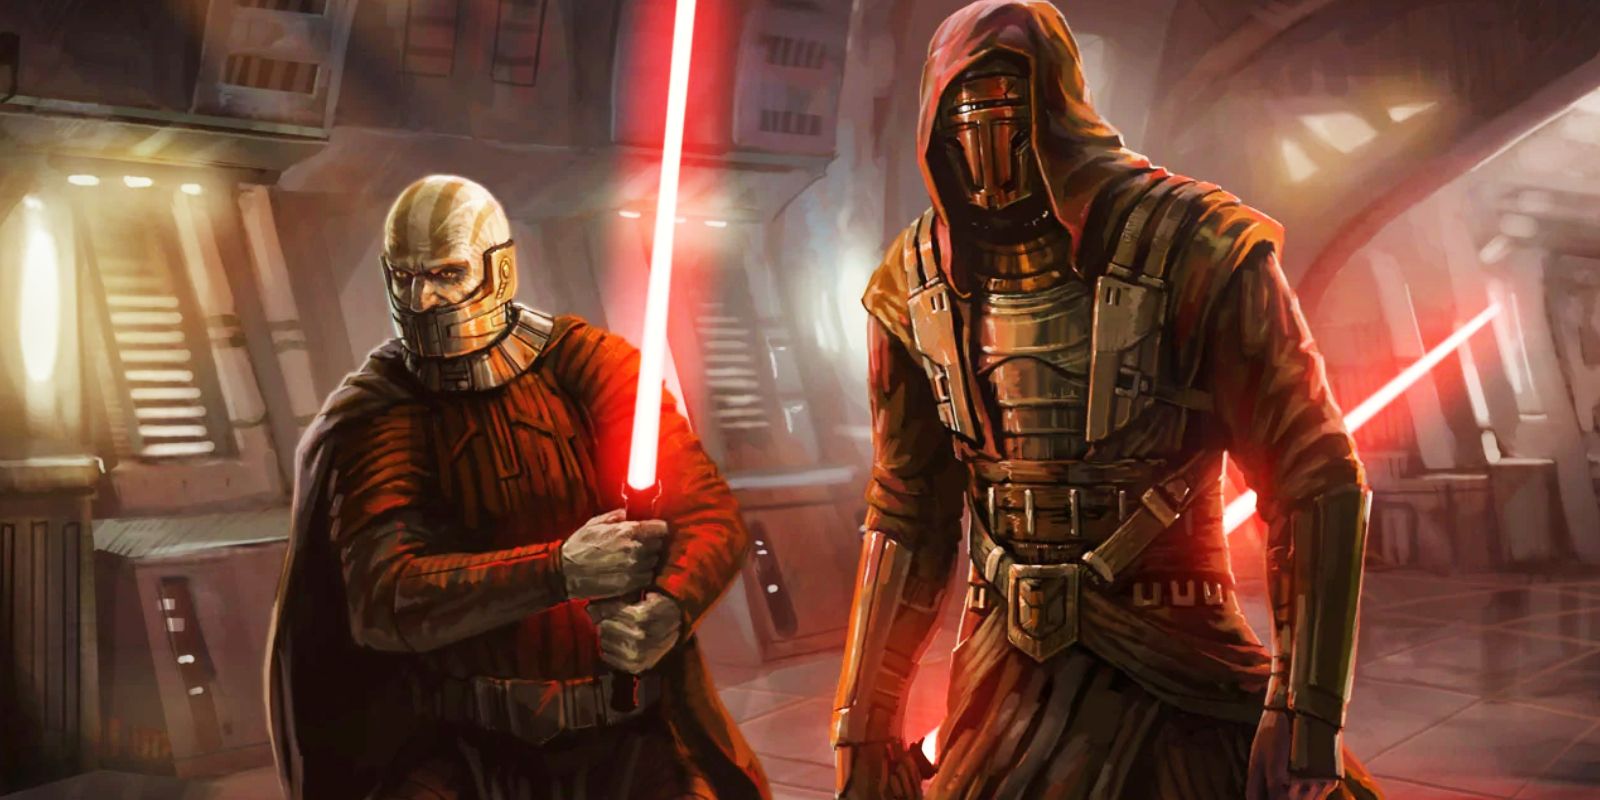 Revan and Malak from Star Wars: Knights of the Old Republic, standing side-by-side holding their red lightsabers.